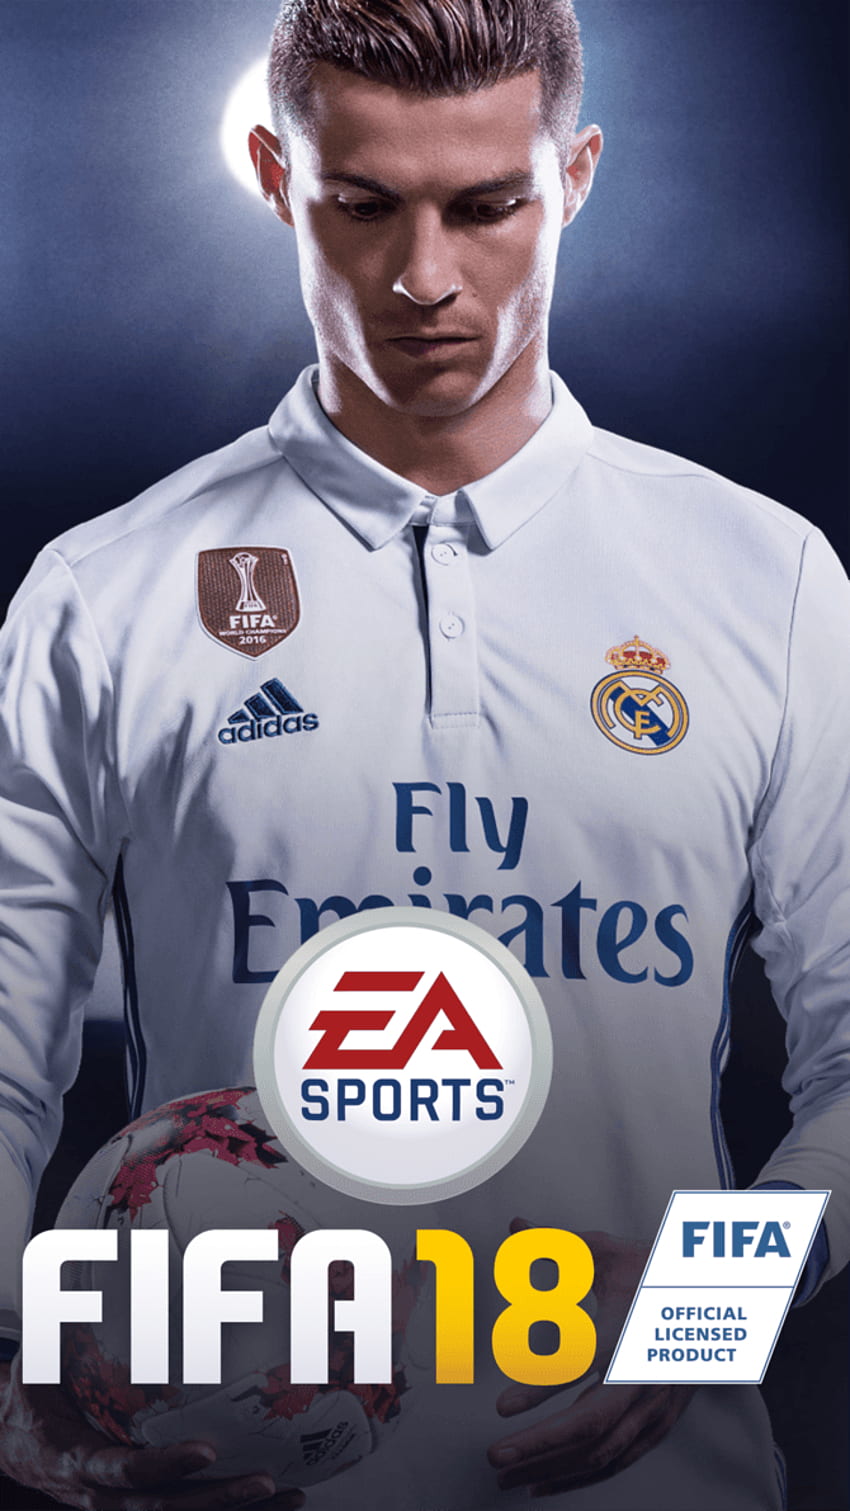 FIFA 16 Ultimate Team - how to play like Messi | Pocket Gamer